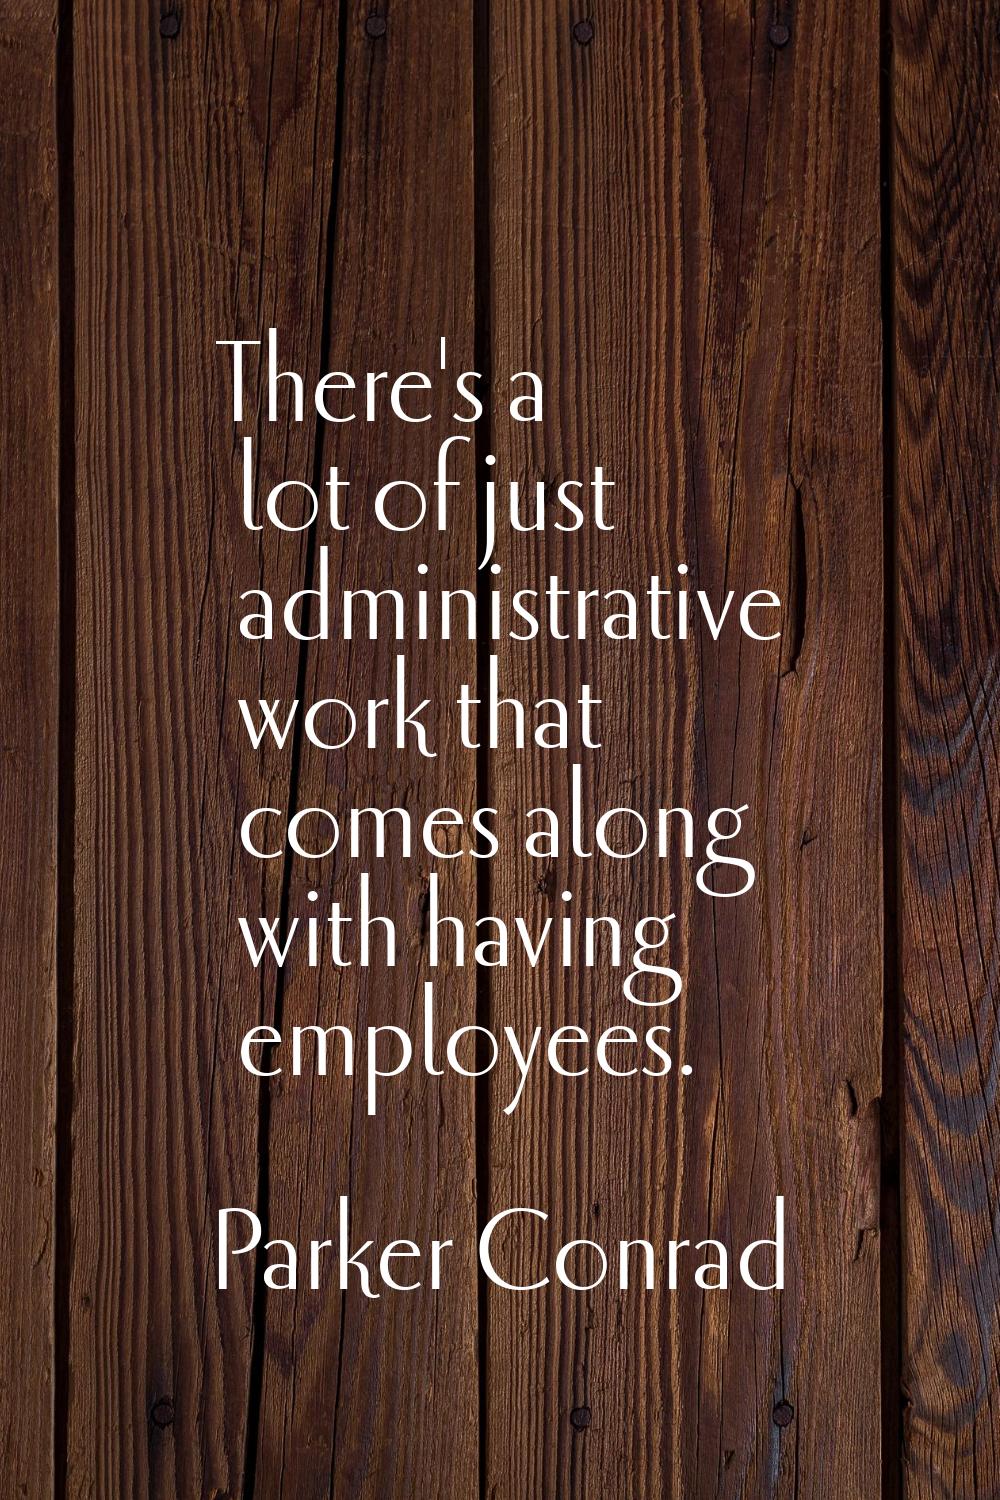 There's a lot of just administrative work that comes along with having employees.